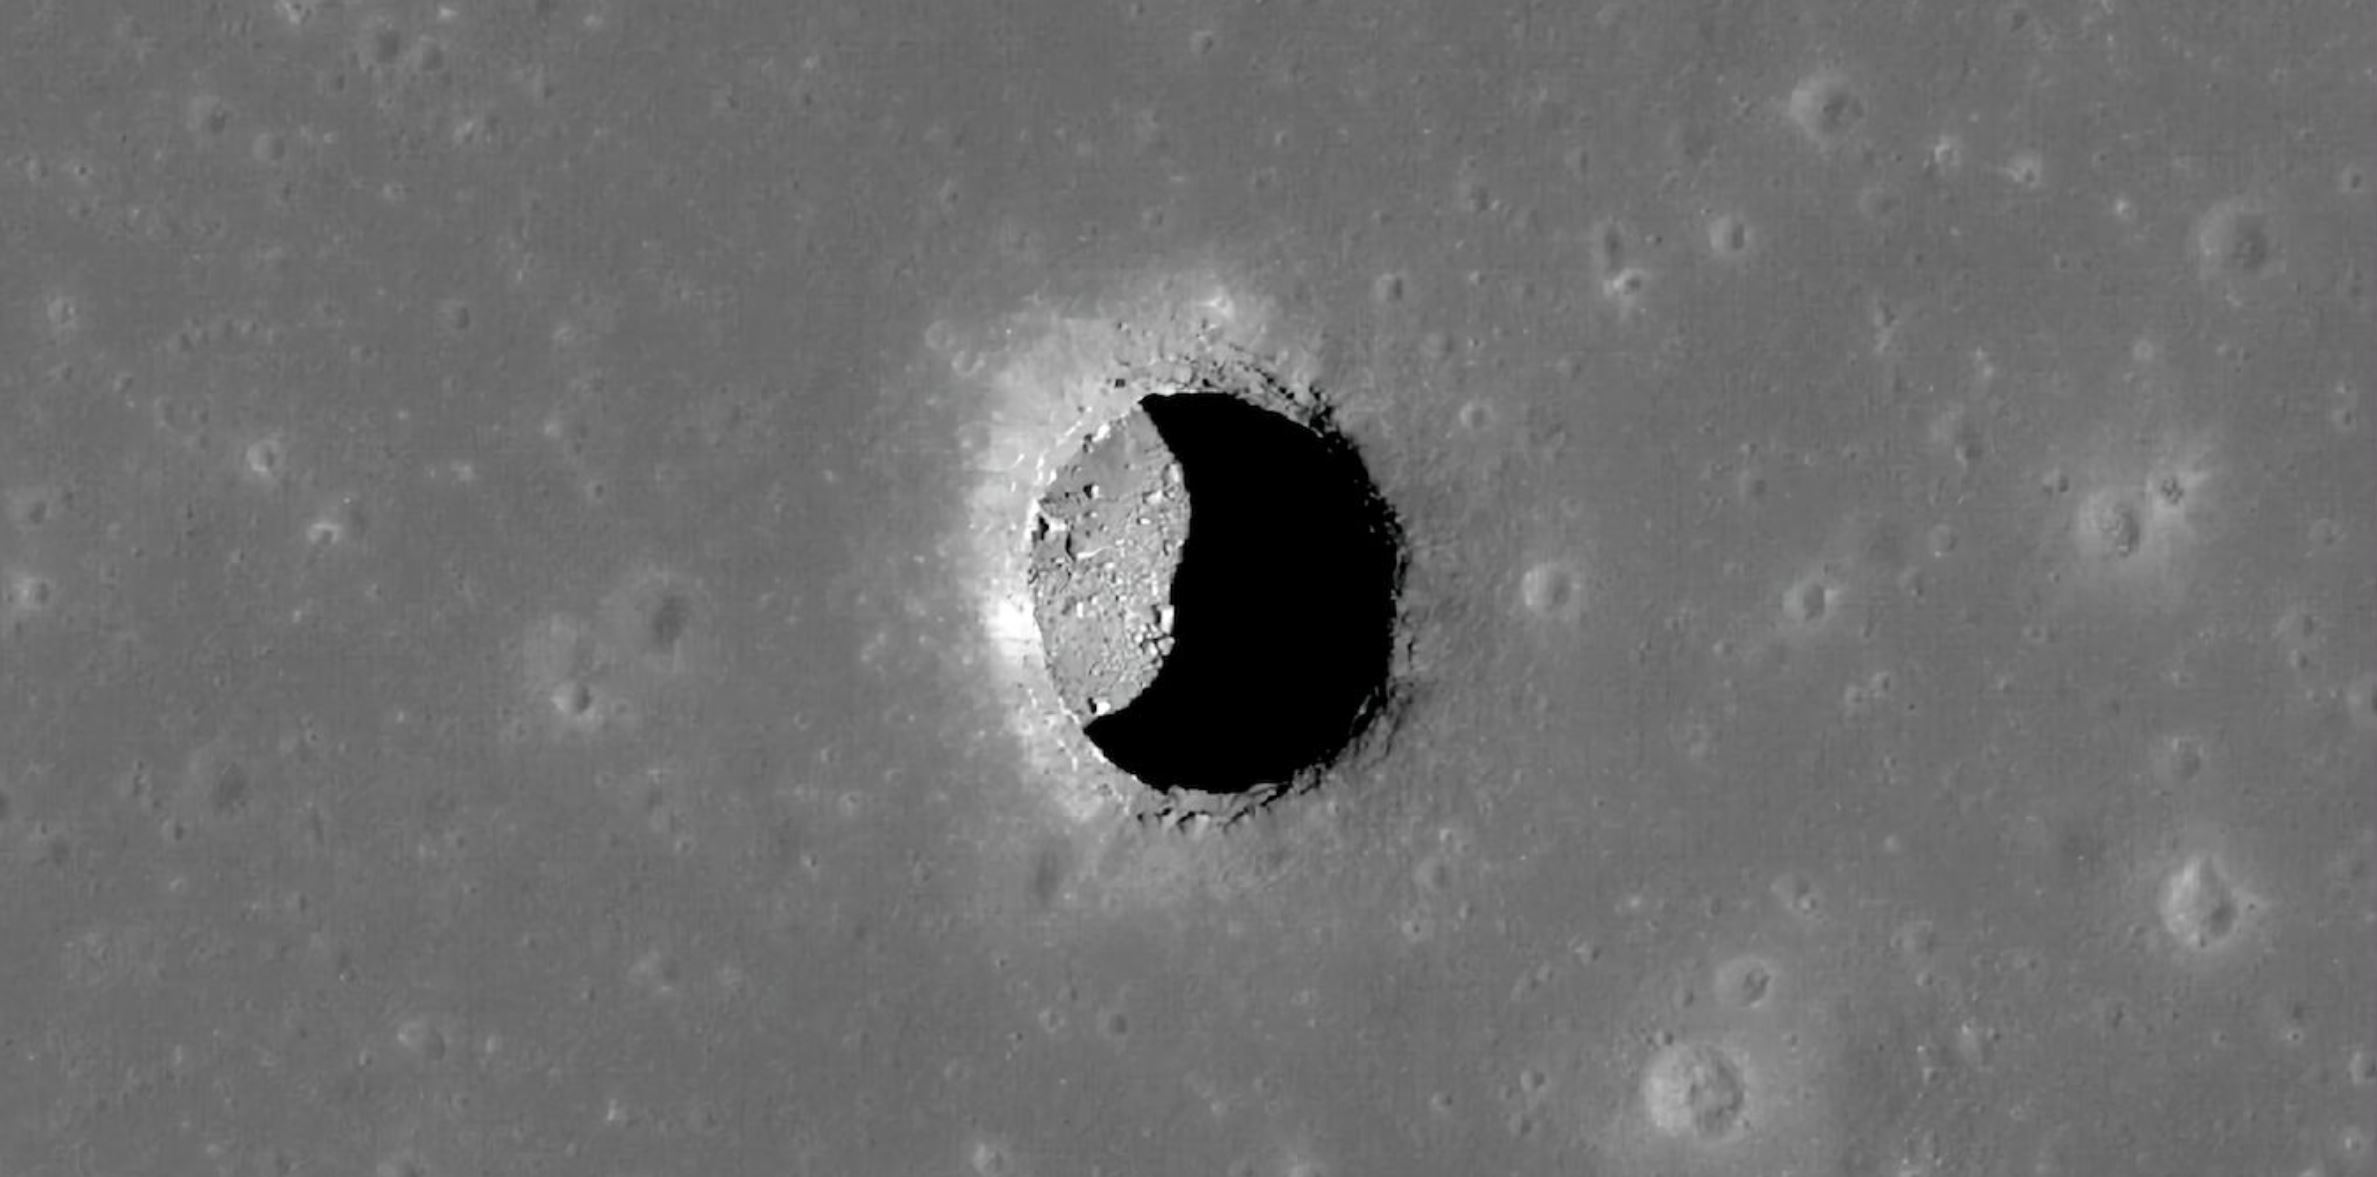 A pit on the surface of the Moon. Image Credit: NASA/GSFC/Arizona State University.